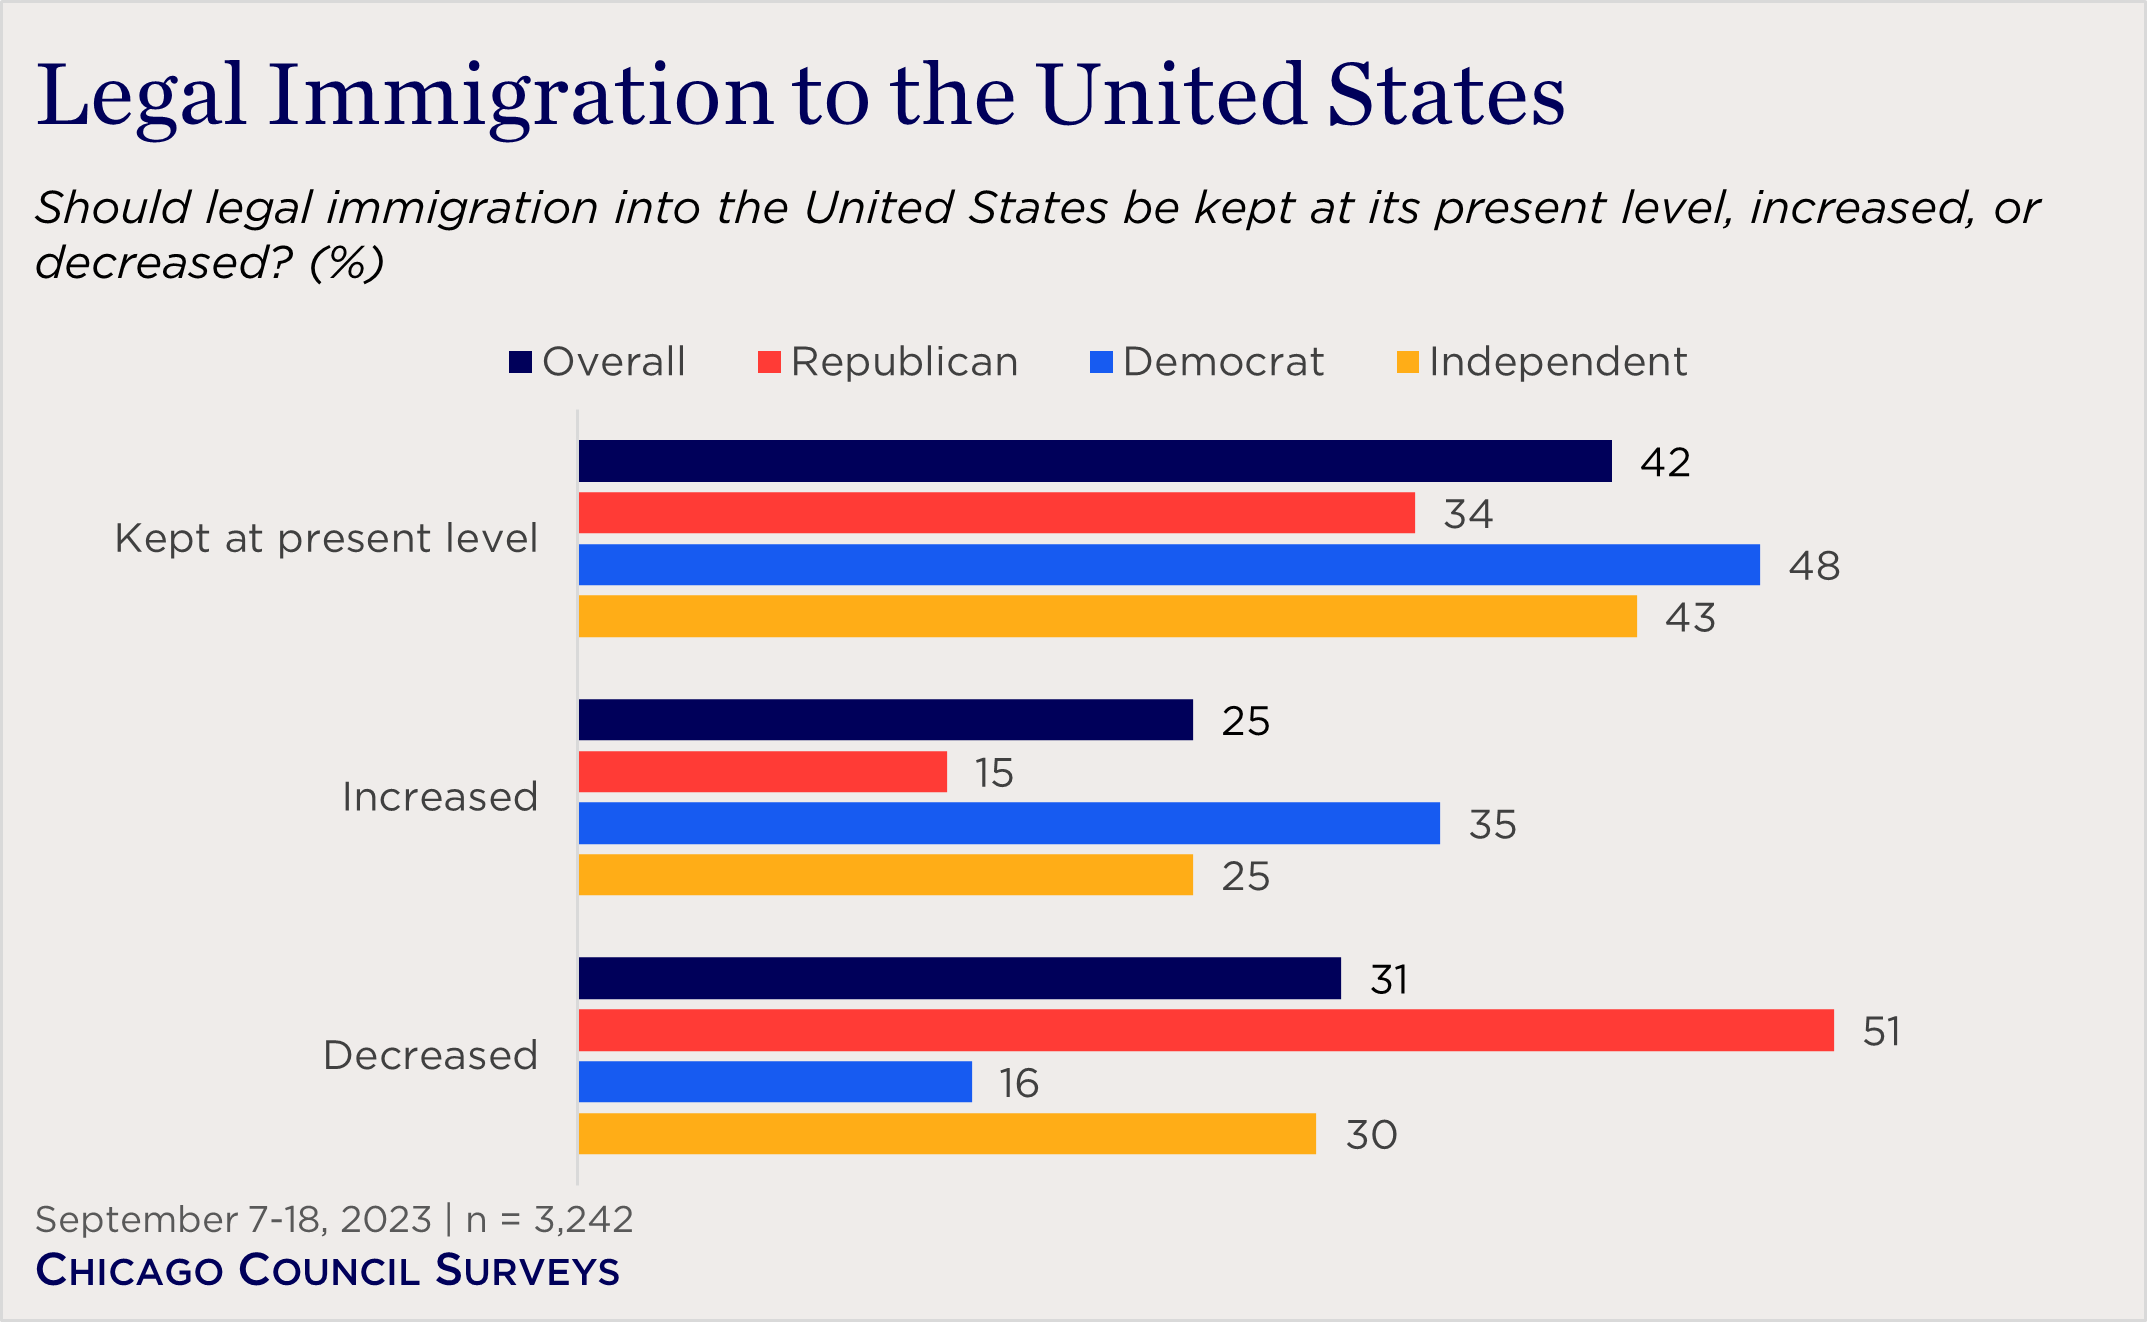 "bar chart showing partisan views on legal immigration levels"